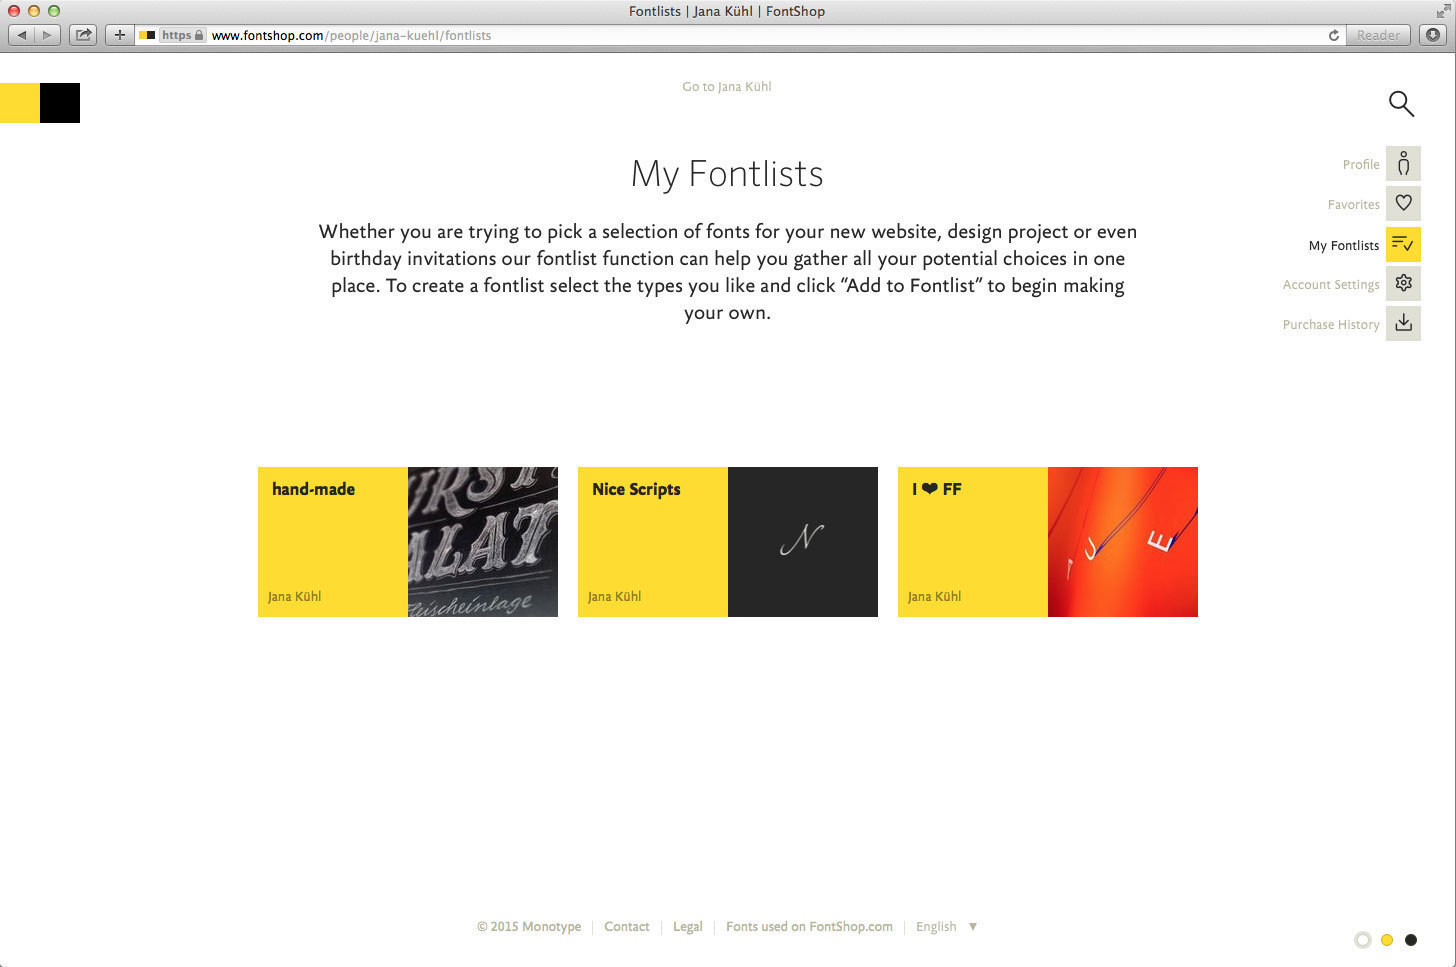 The _My Fontlists_ page lists all the Fontlists you created.